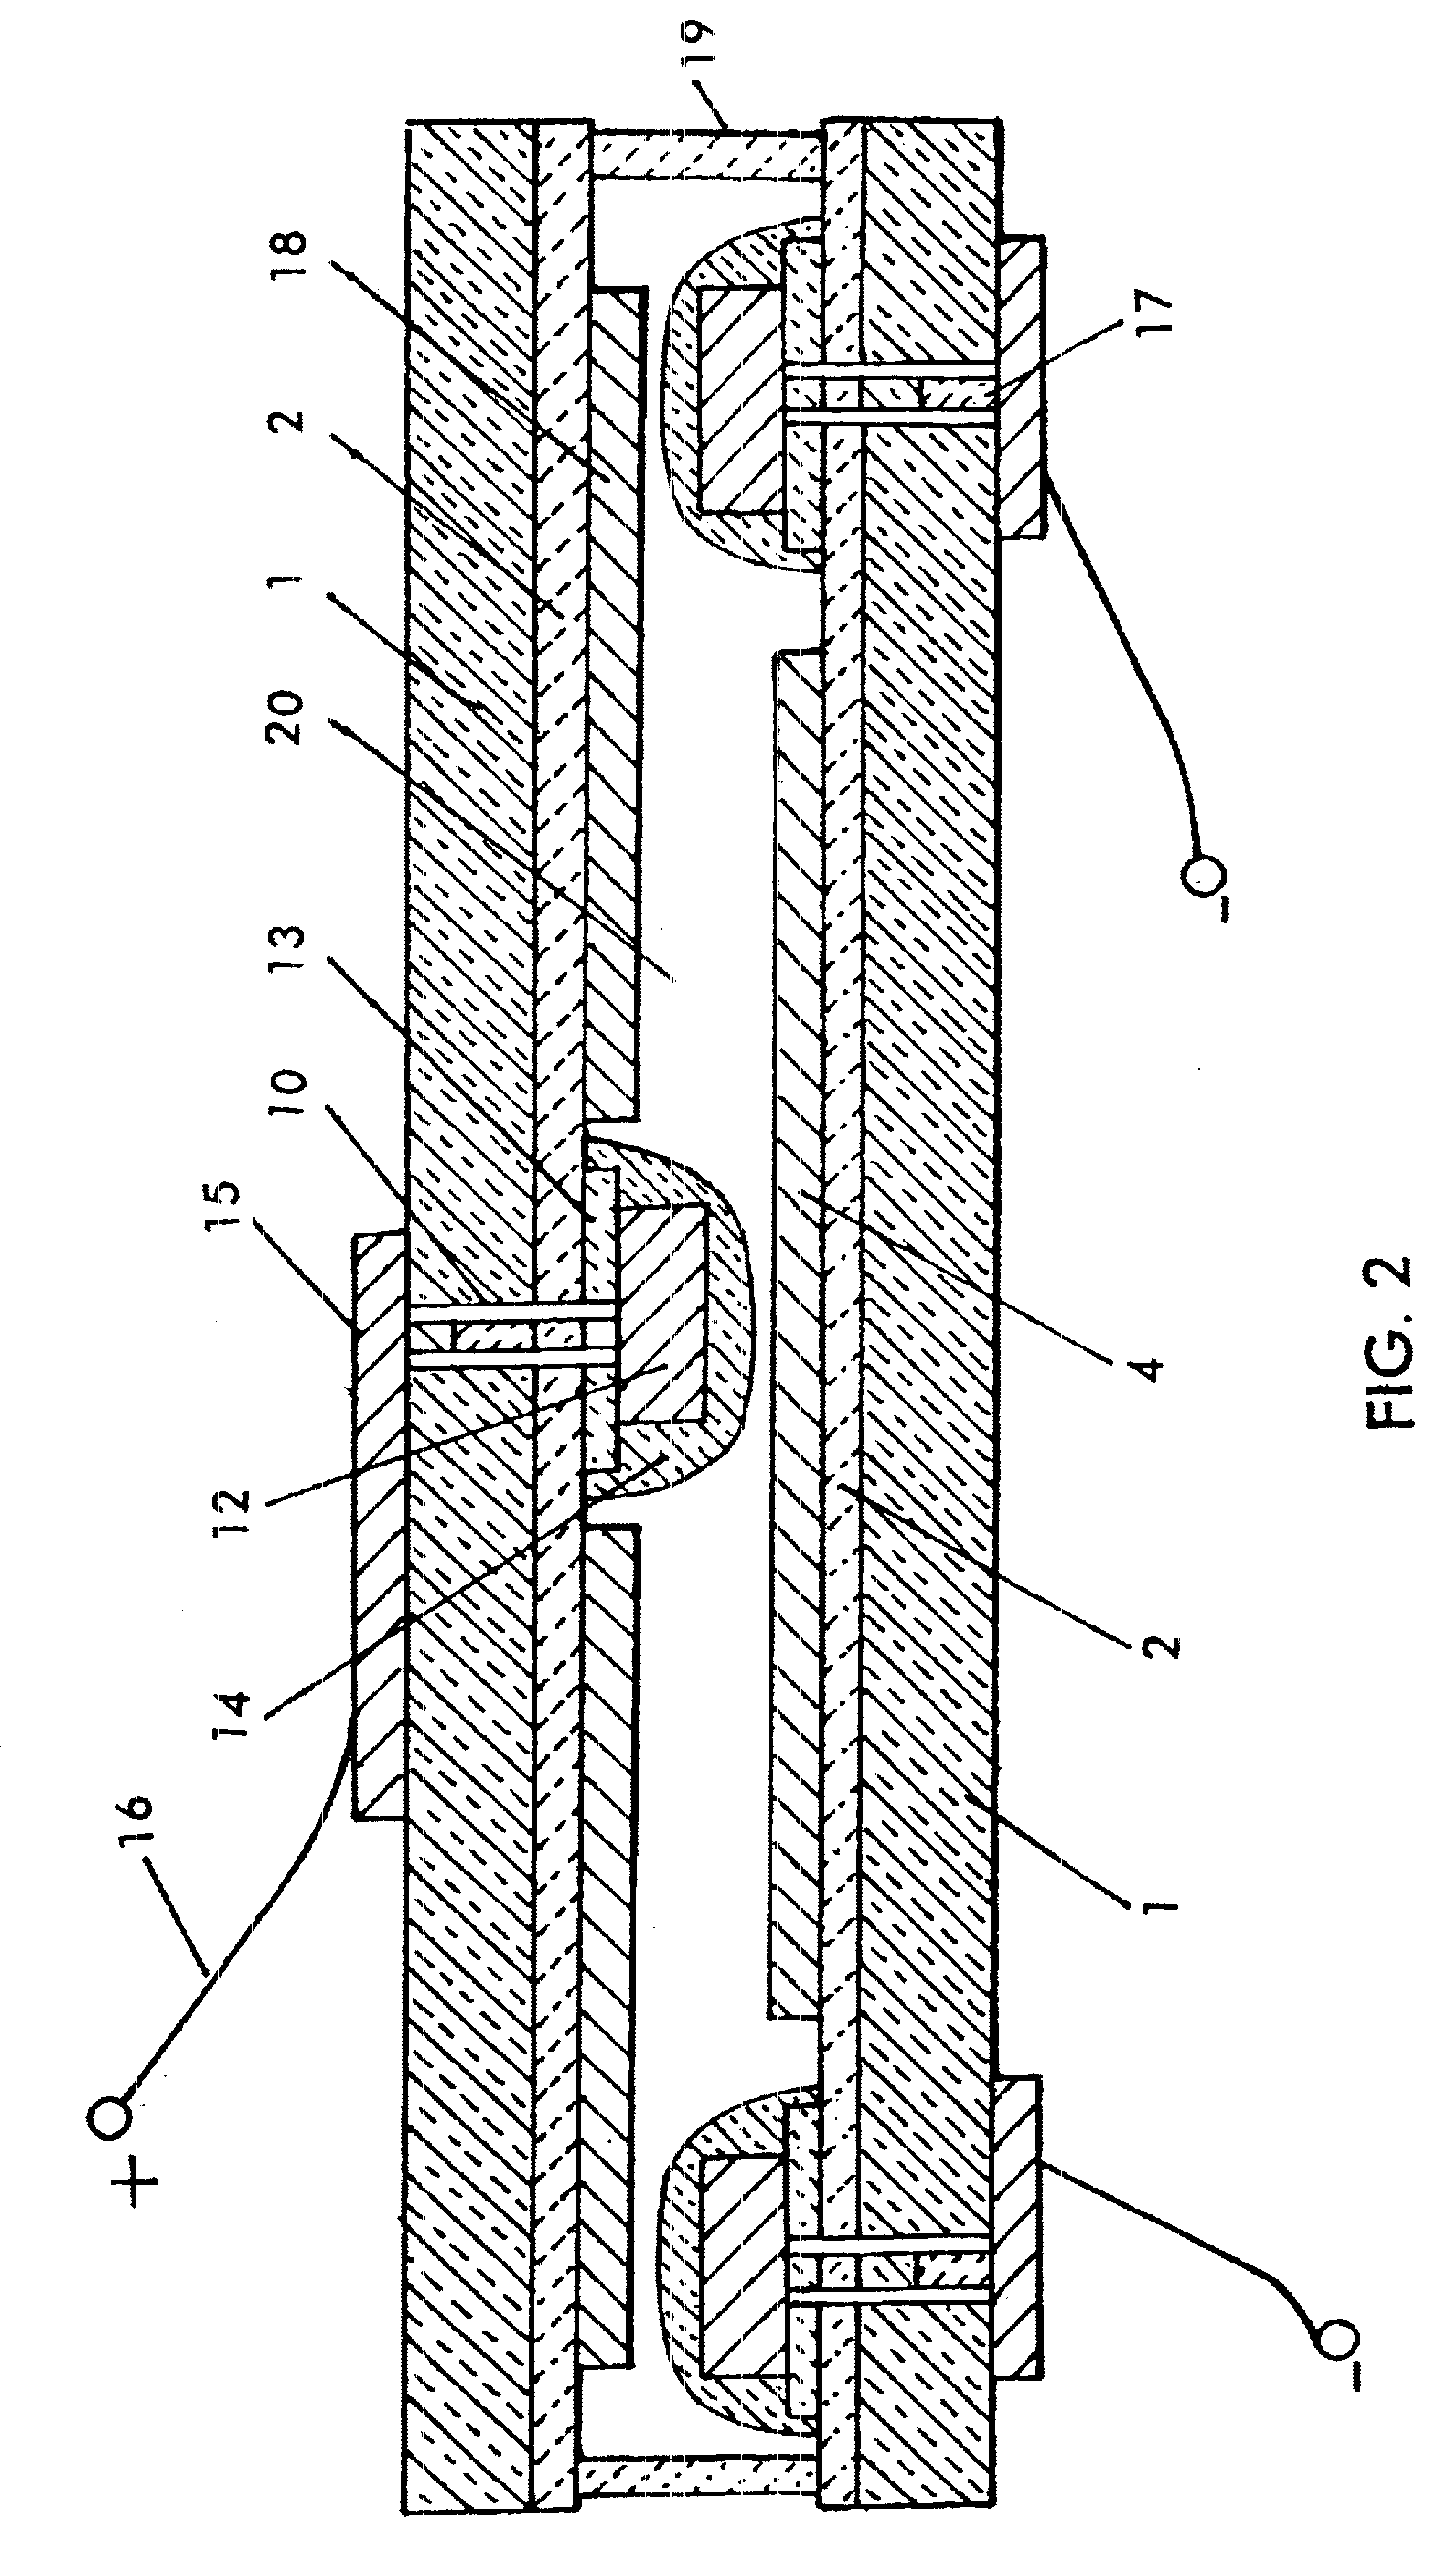 Method to implement sealing and electrical connections to single cell and multi-cell regenerative photoelectrochemical devices